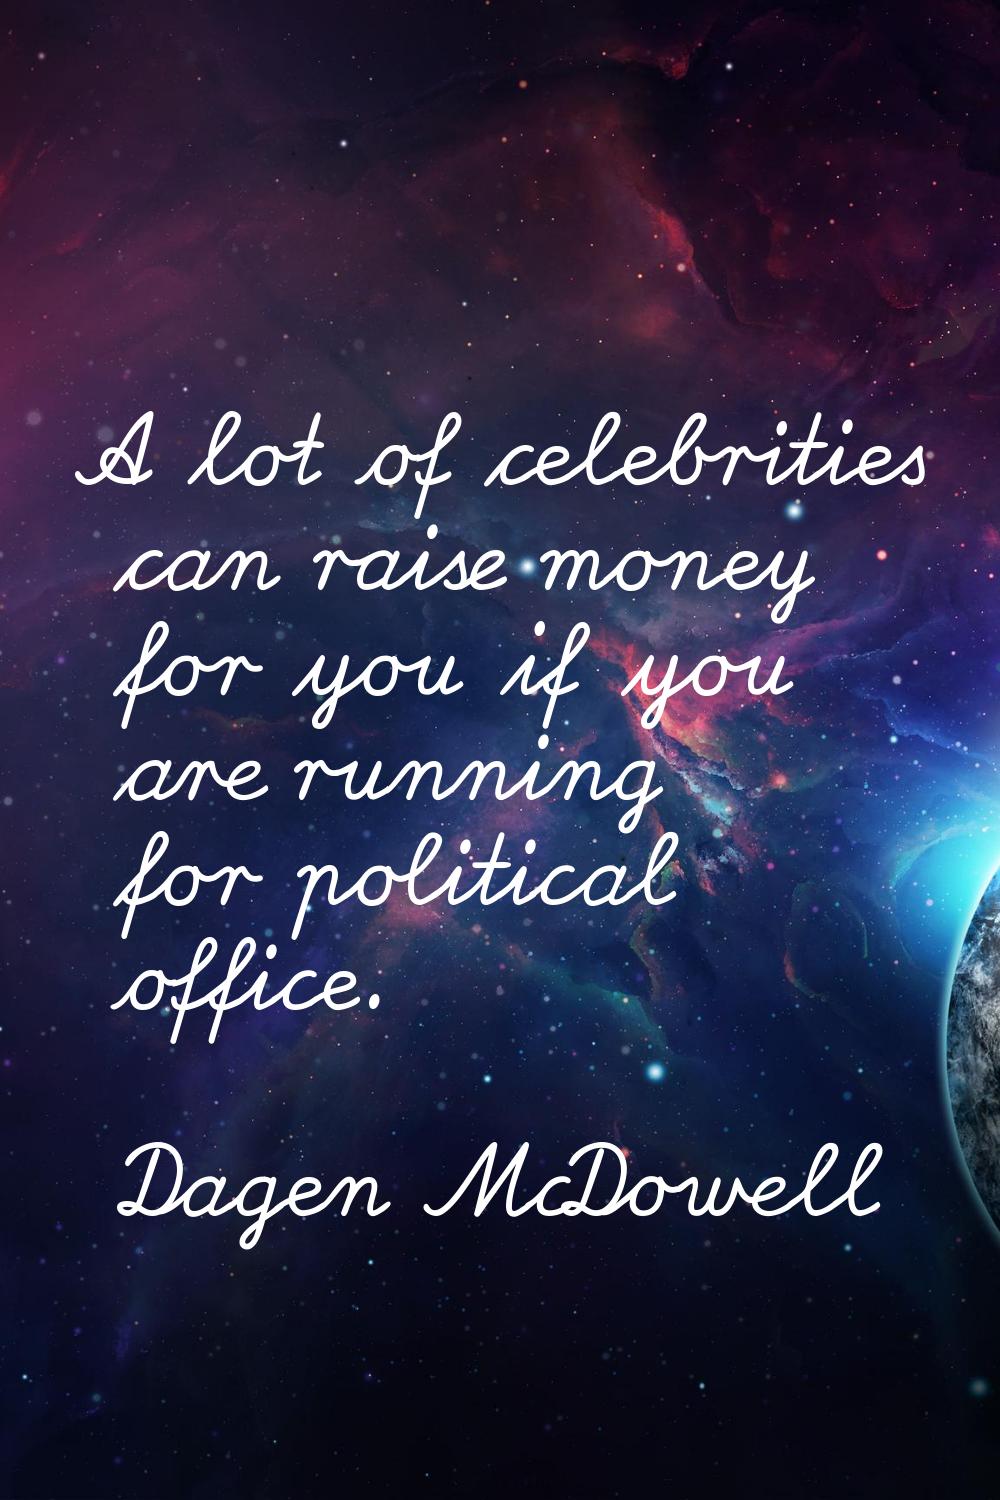 A lot of celebrities can raise money for you if you are running for political office.